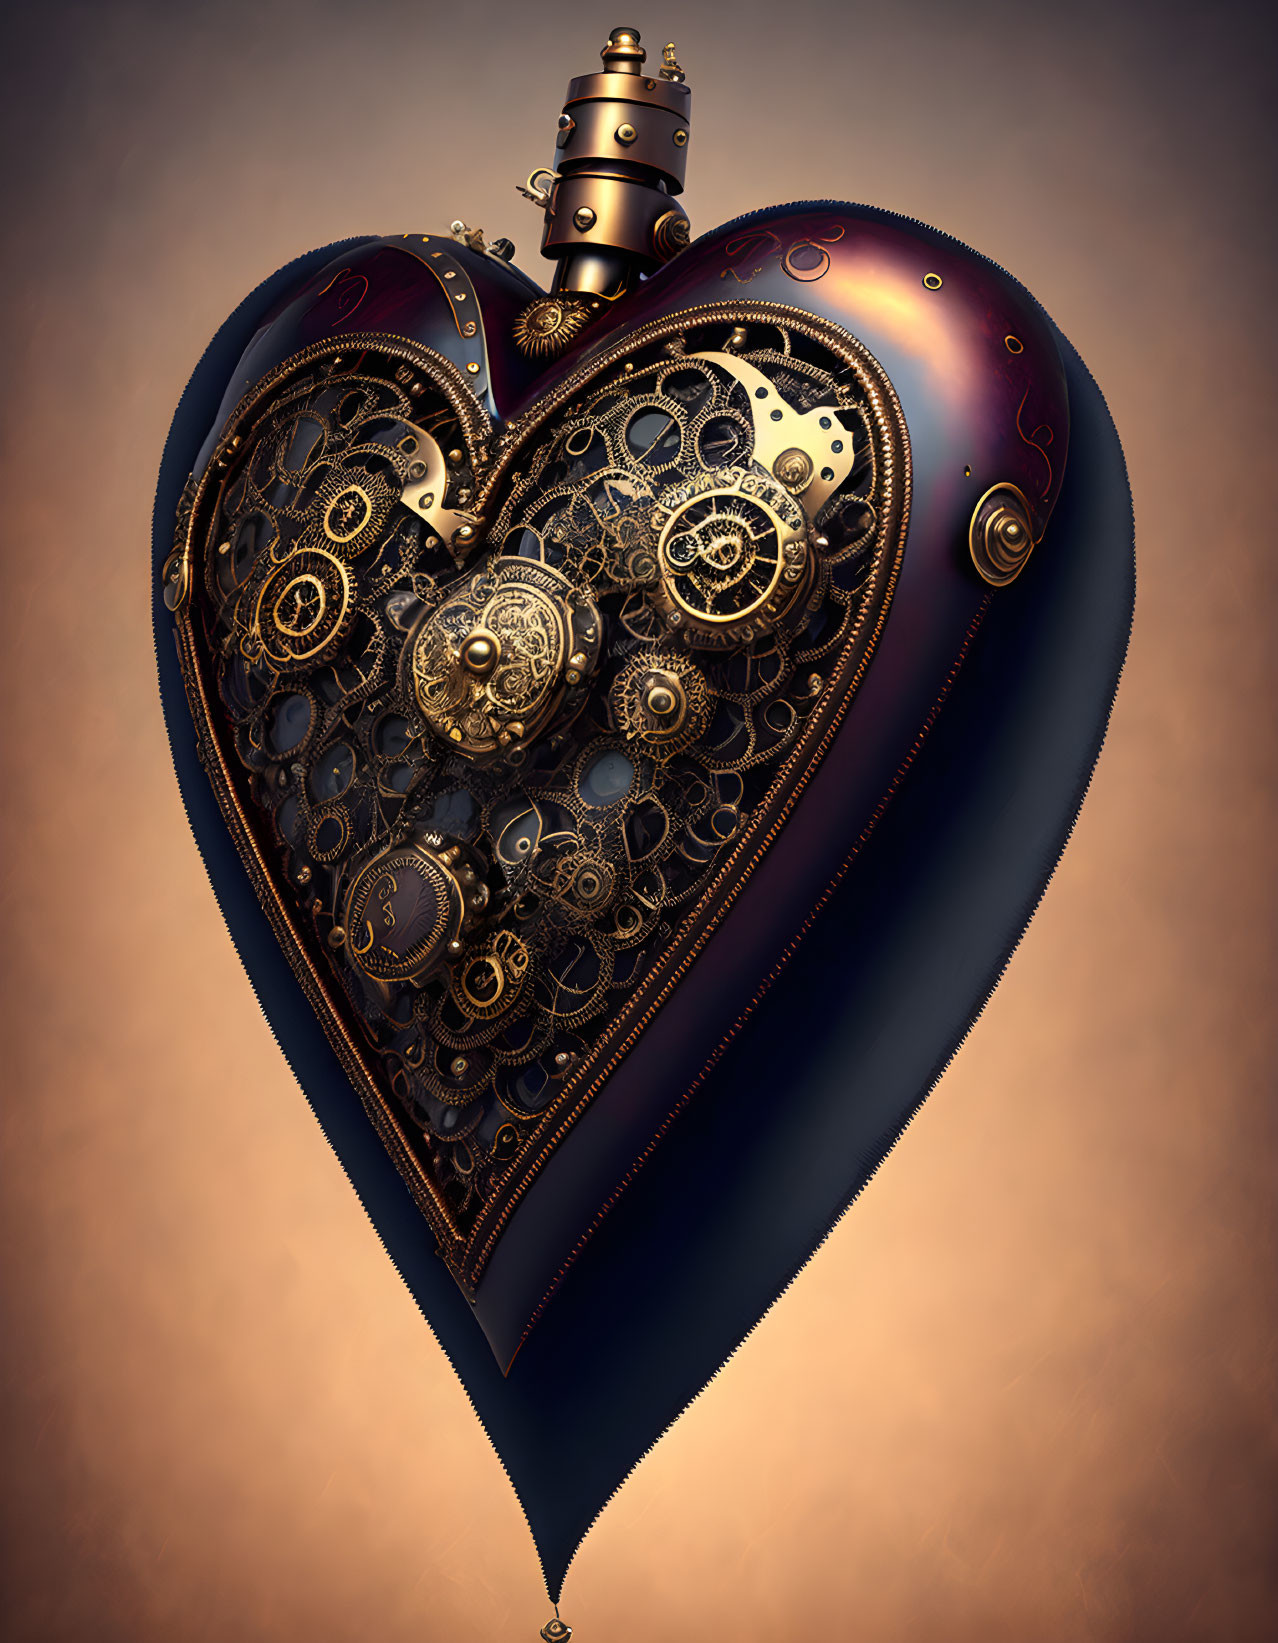 Intricate Steampunk Heart Illustration with Gears and Cogs